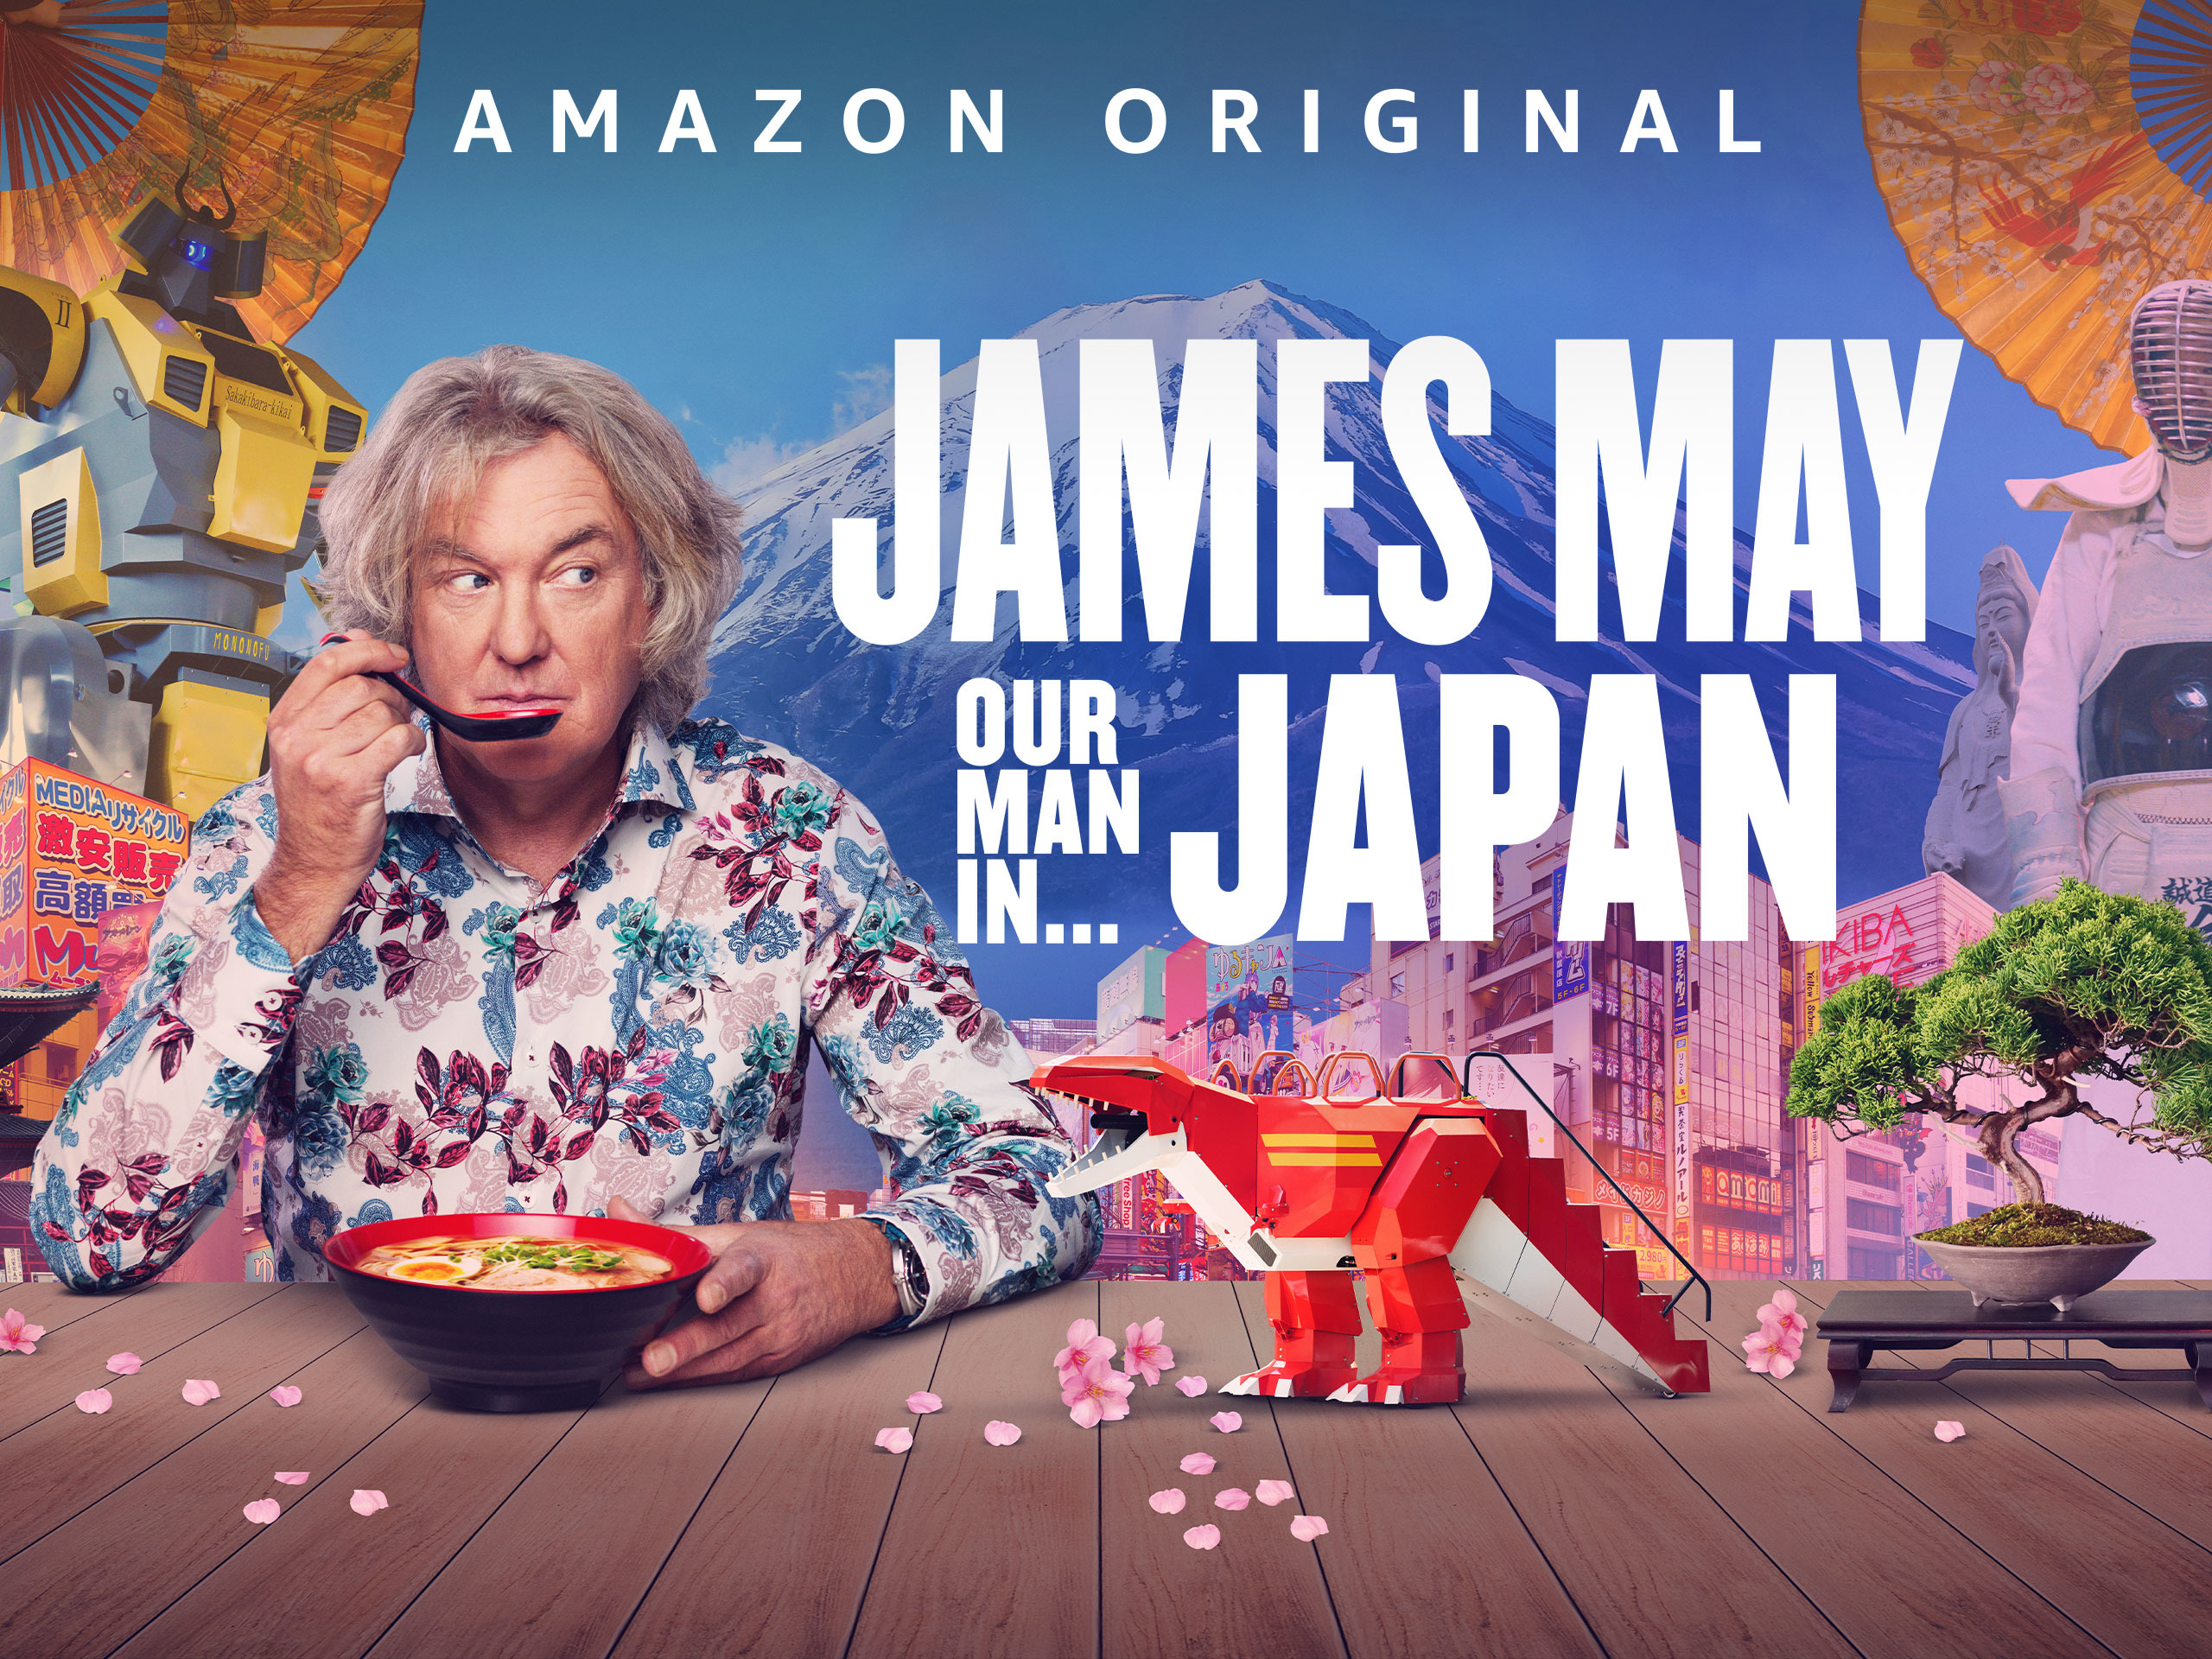  James  May  Our Man In Japan  An Adventure To See Japan  s 